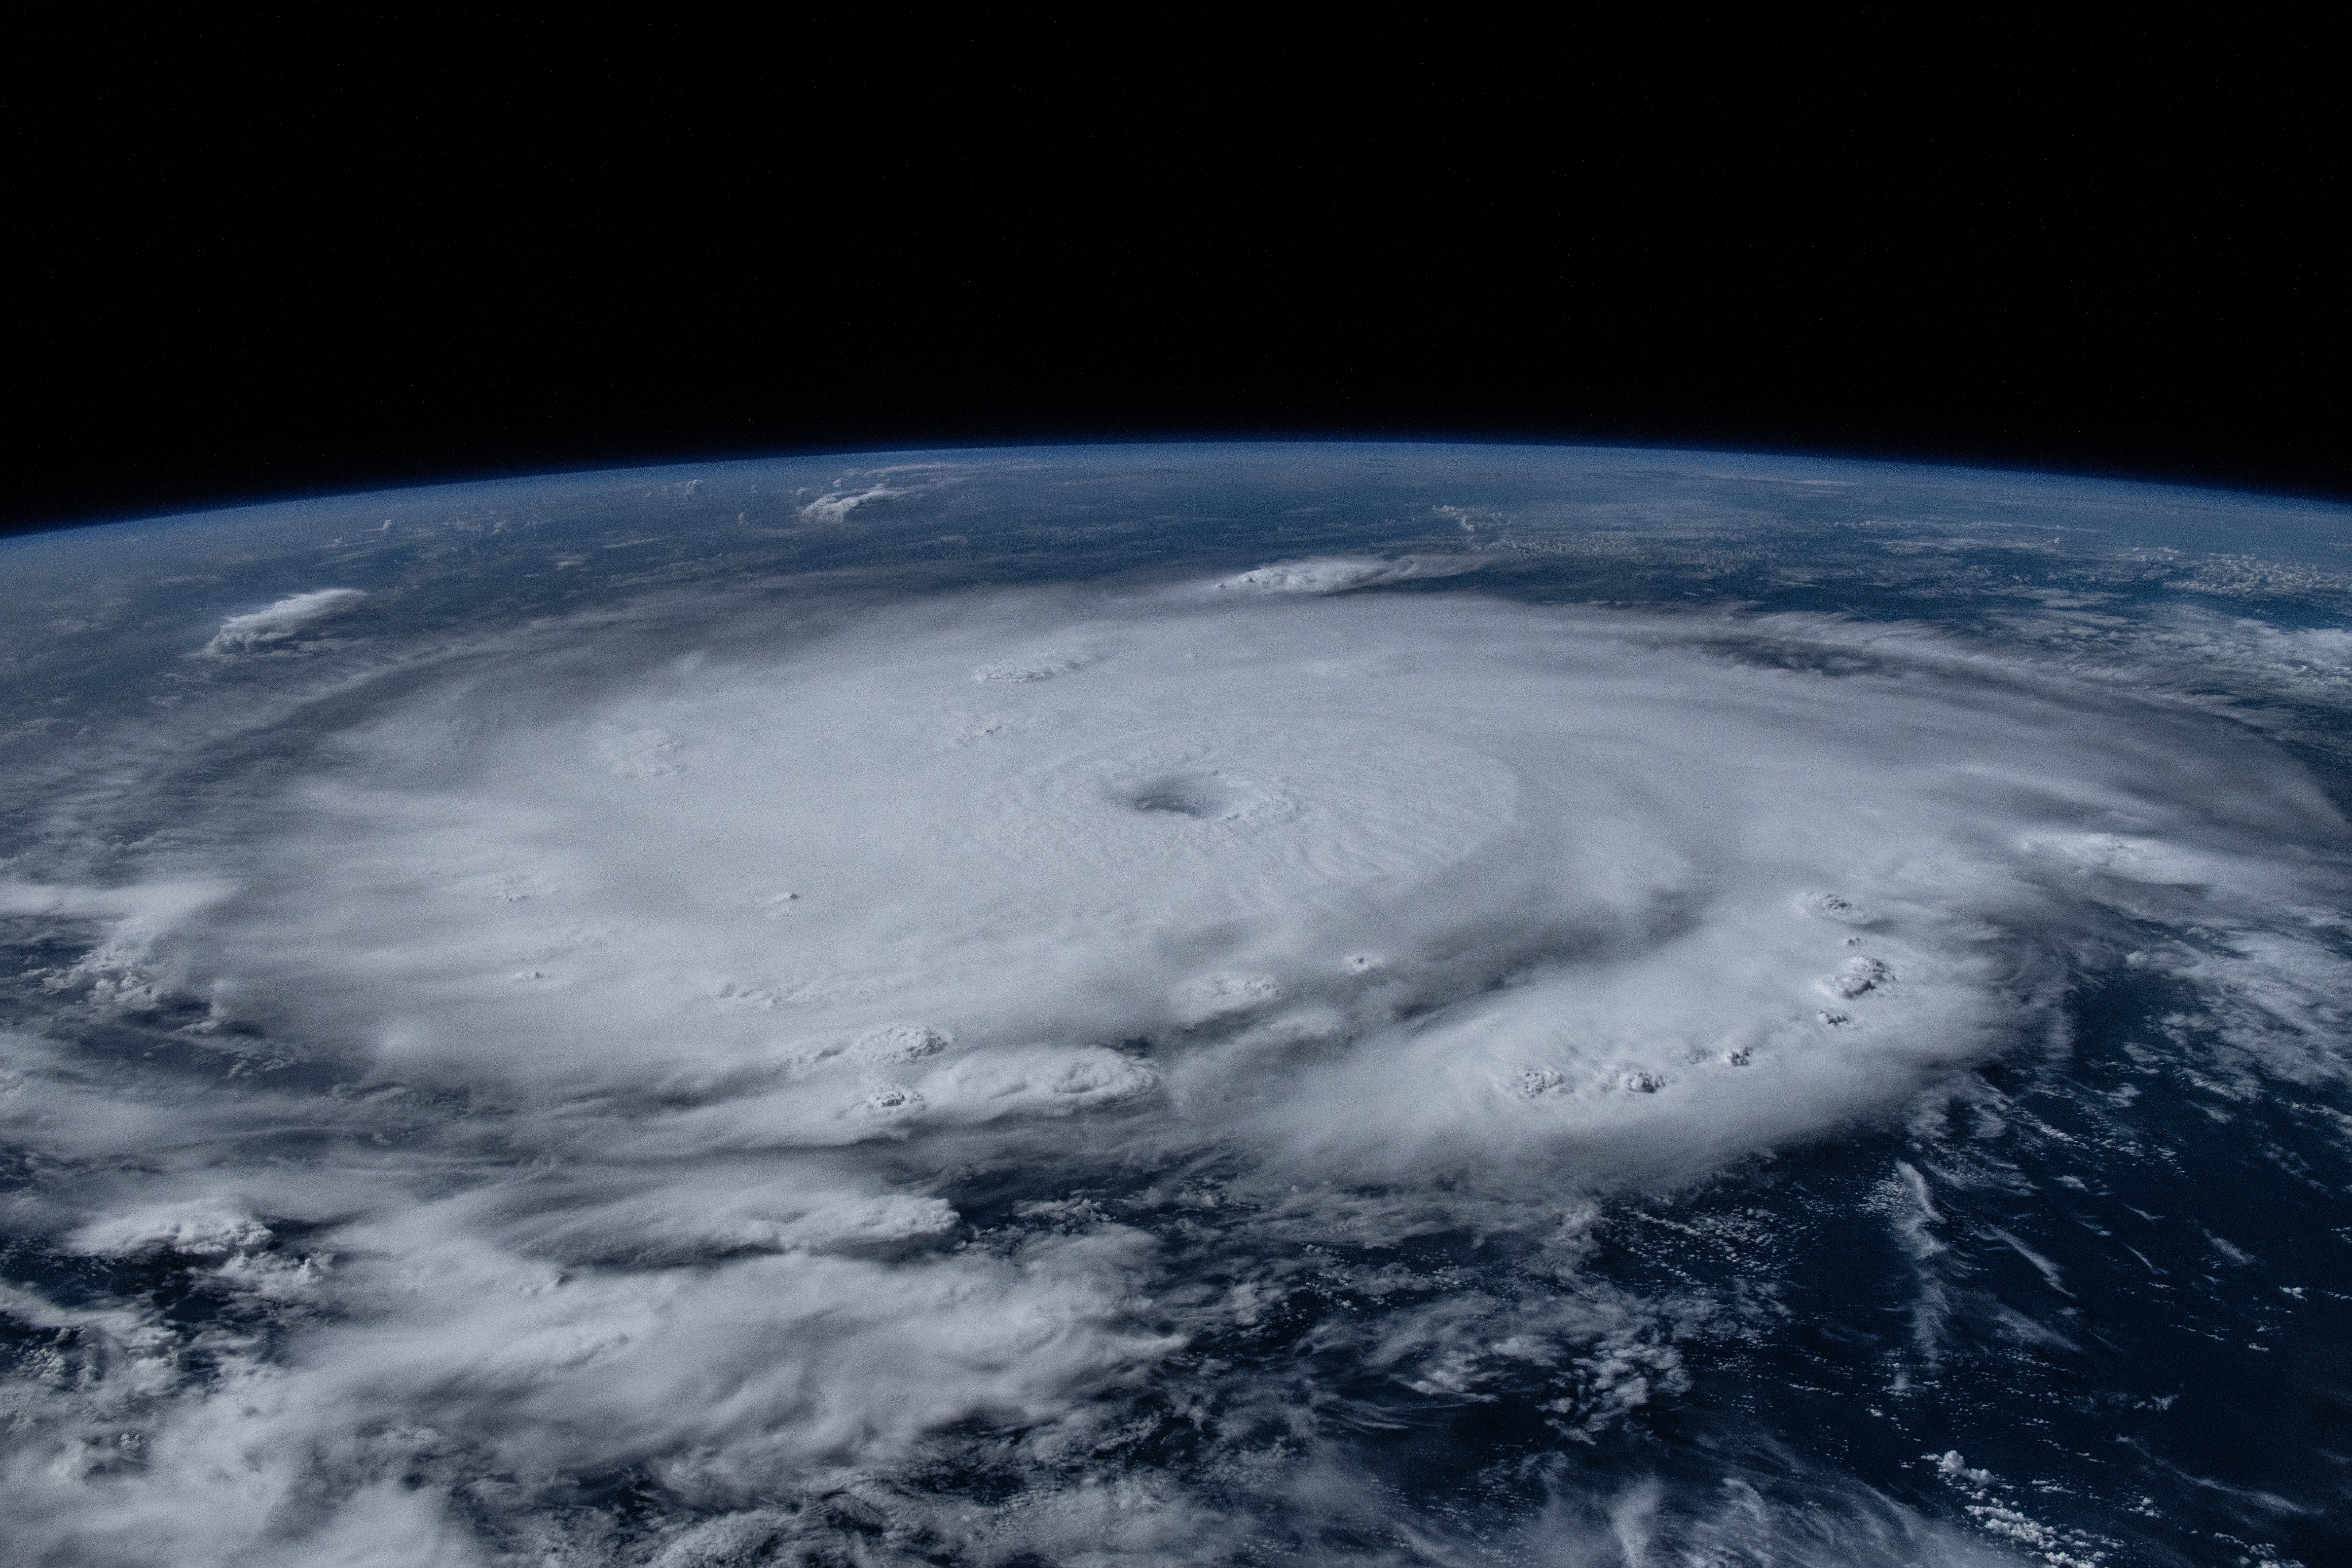 A view of Hurricane Beryl from the International Space Station. The hurricane is a big white circle of clouds, with spiral arms visible at far right and bottom middle. The surrounding water is various shades of blue: lighter blue at the top and deeper blue at the bottom of the photo. Earth's curve is visible in the back, up against the darkness of space.